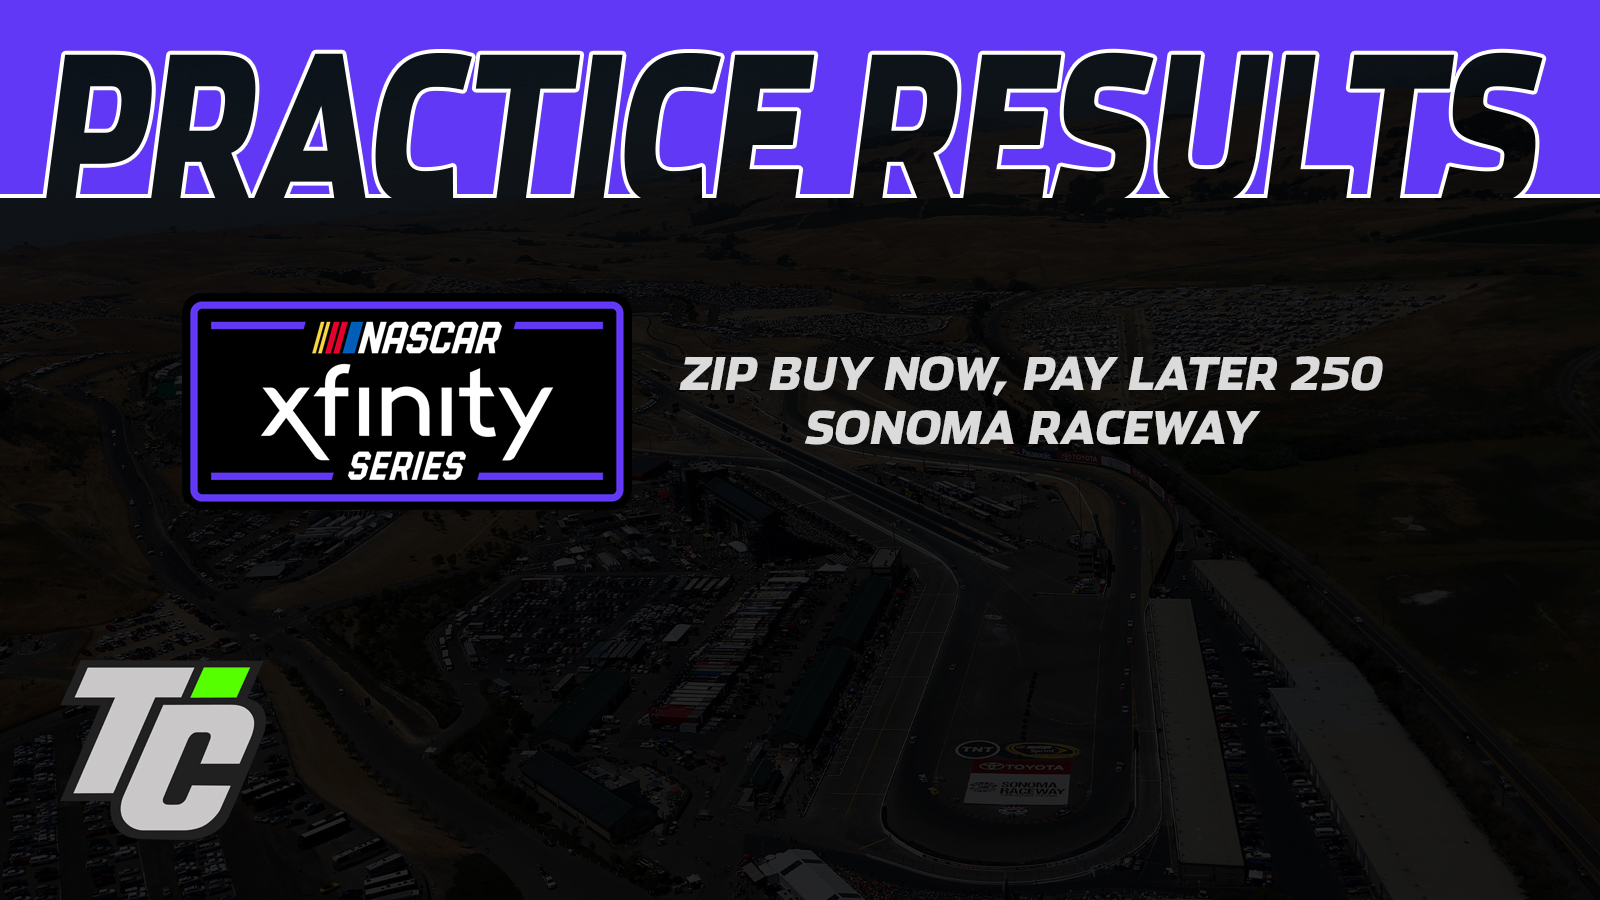 NASCAR Xfinity Series Zip Buy Now, Pay Later 250 practice results Sonoma Raceway